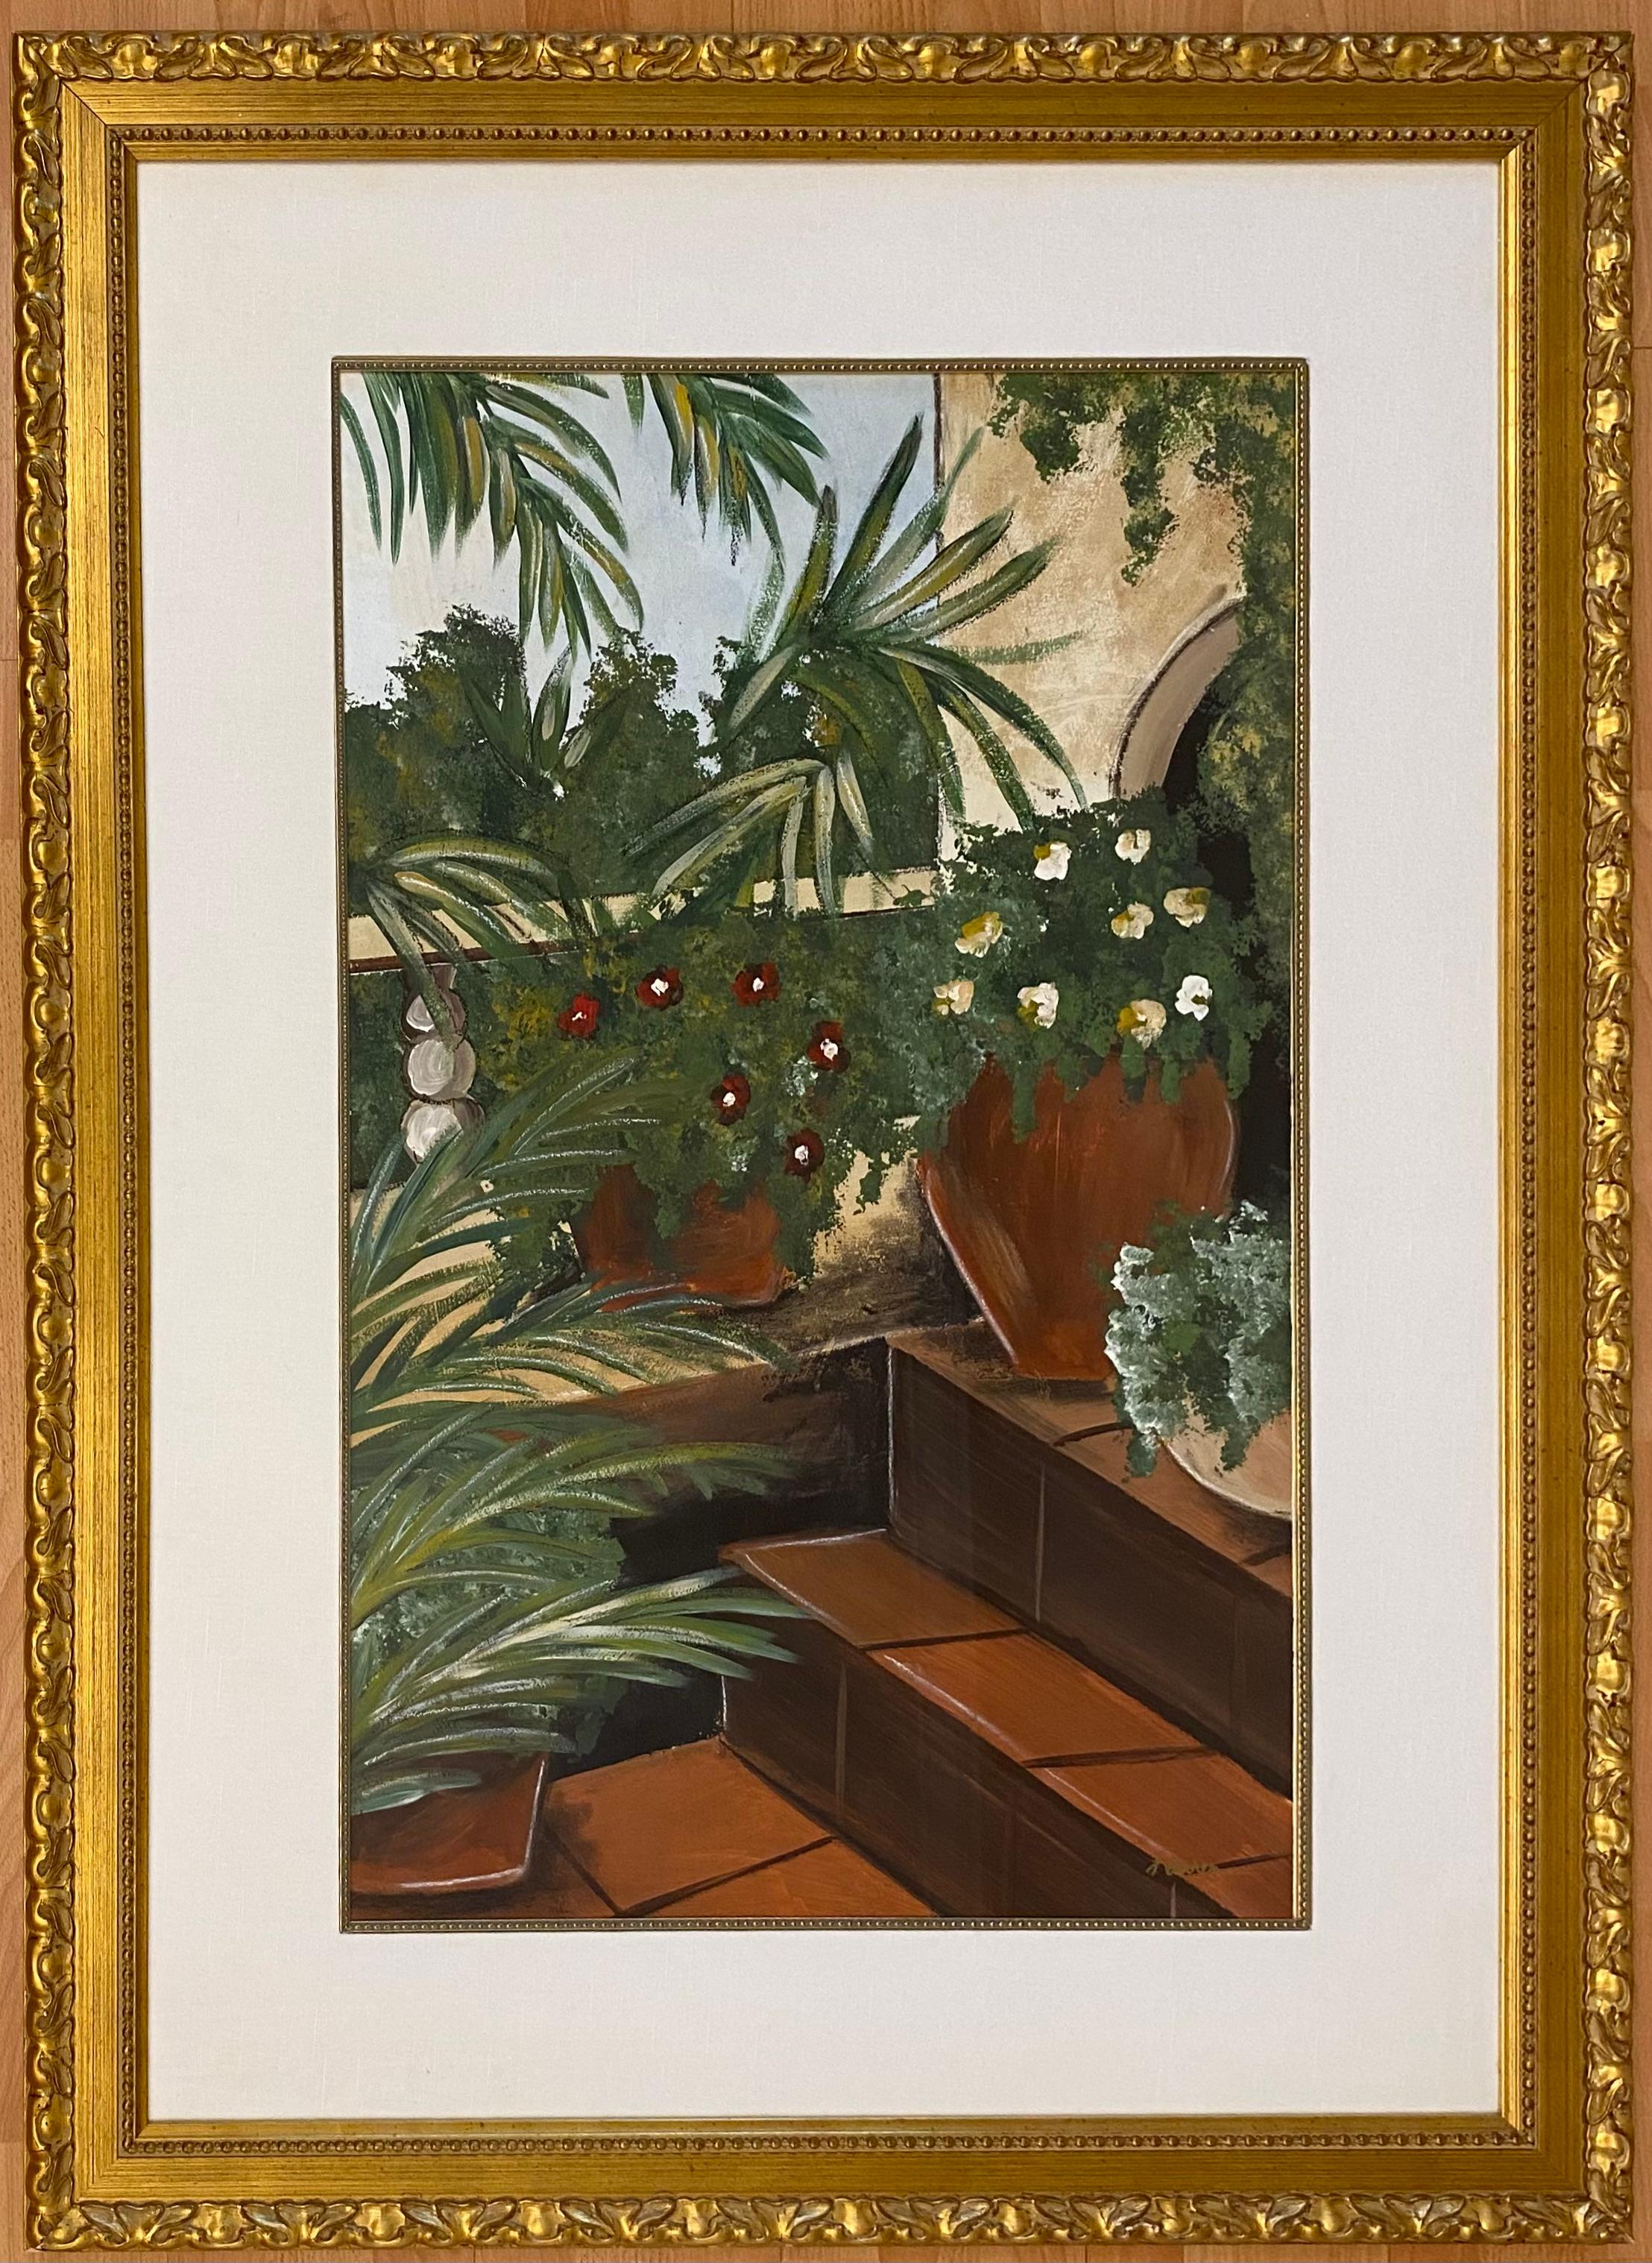 Interiors and Exteriors.
The scene depicts beautiful aspects of nature and home decor.  

Highly stylized, this artwork clearly represents beautiful environments. 

Bold colors that will enhance any space. 
Presented in a very good quality gilt wood